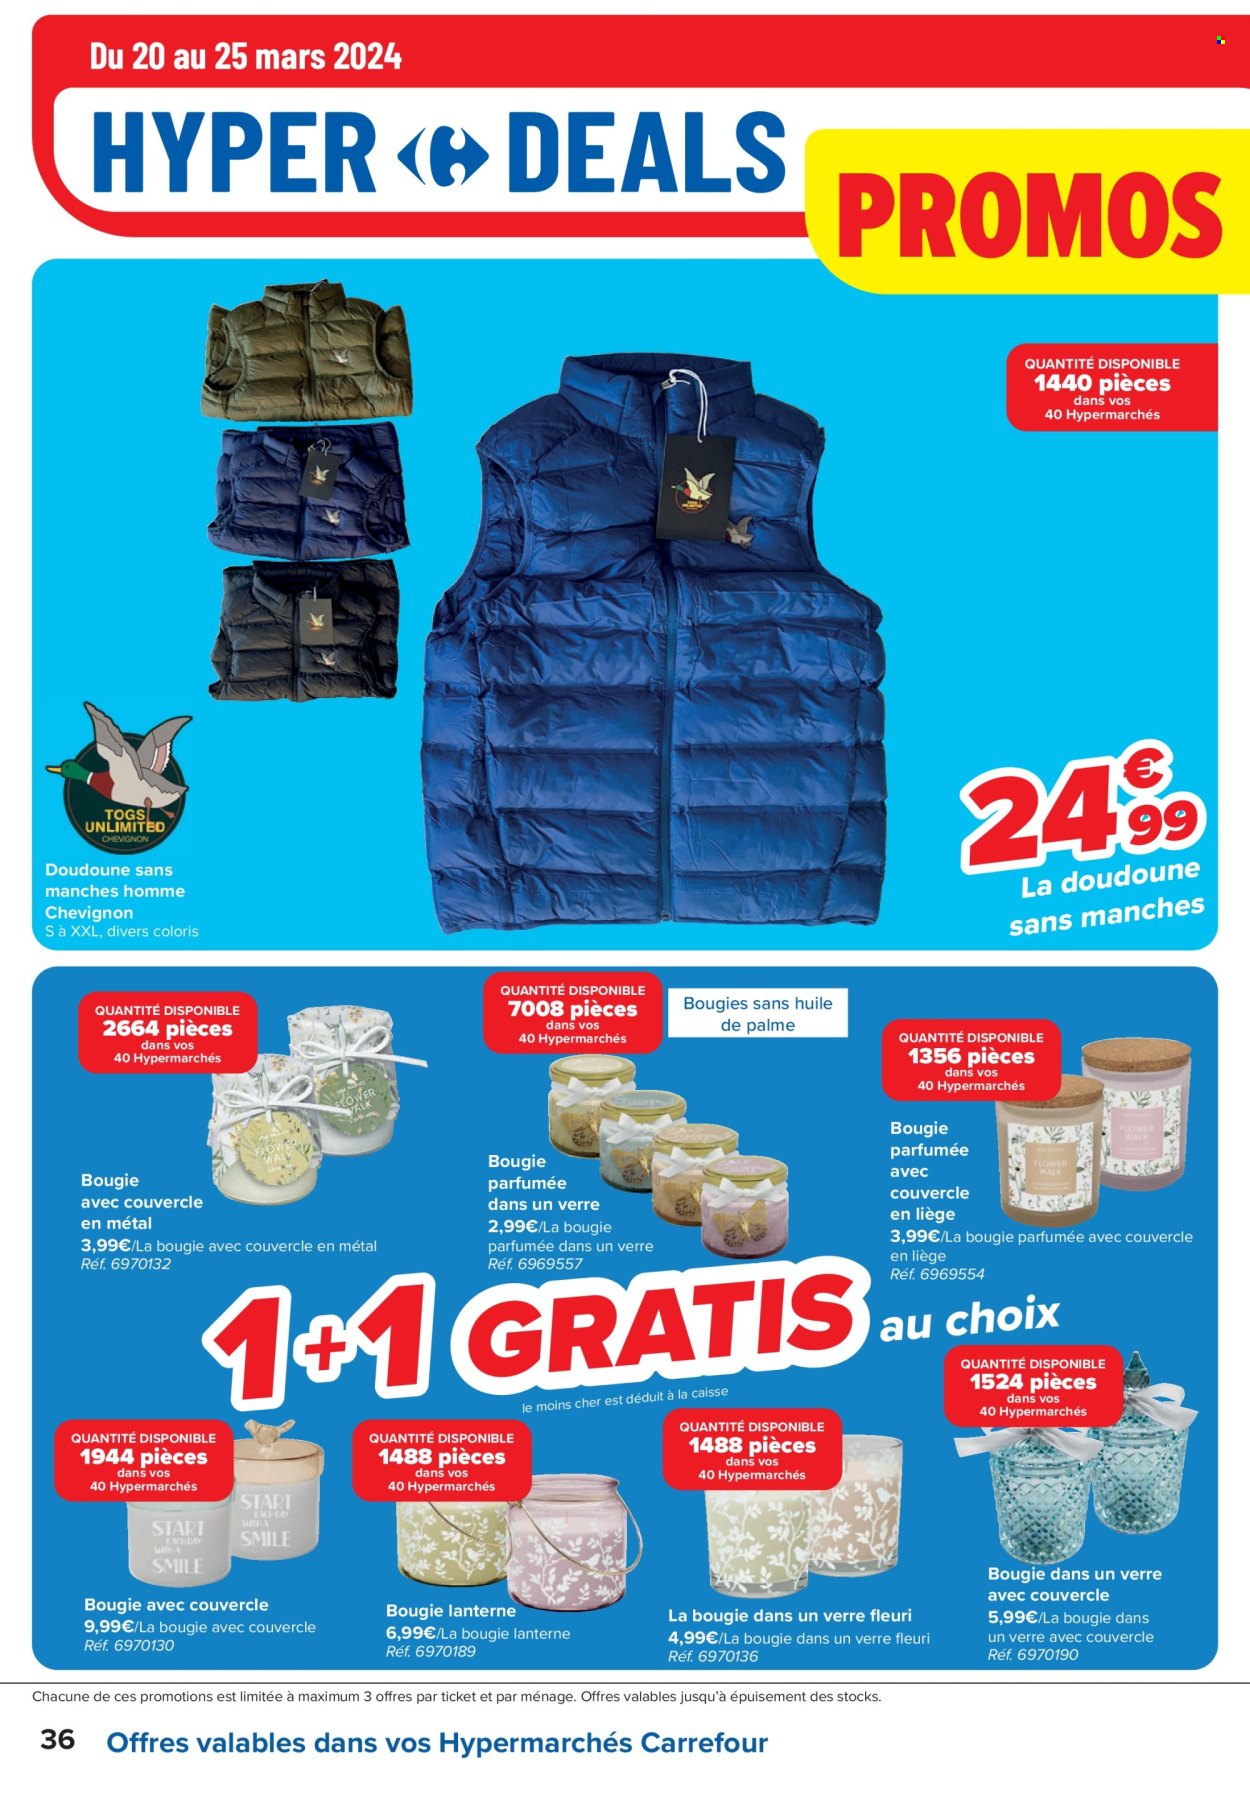 Catalogue Carrefour hypermarkt - 20.3.2024 - 2.4.2024. Page 36.